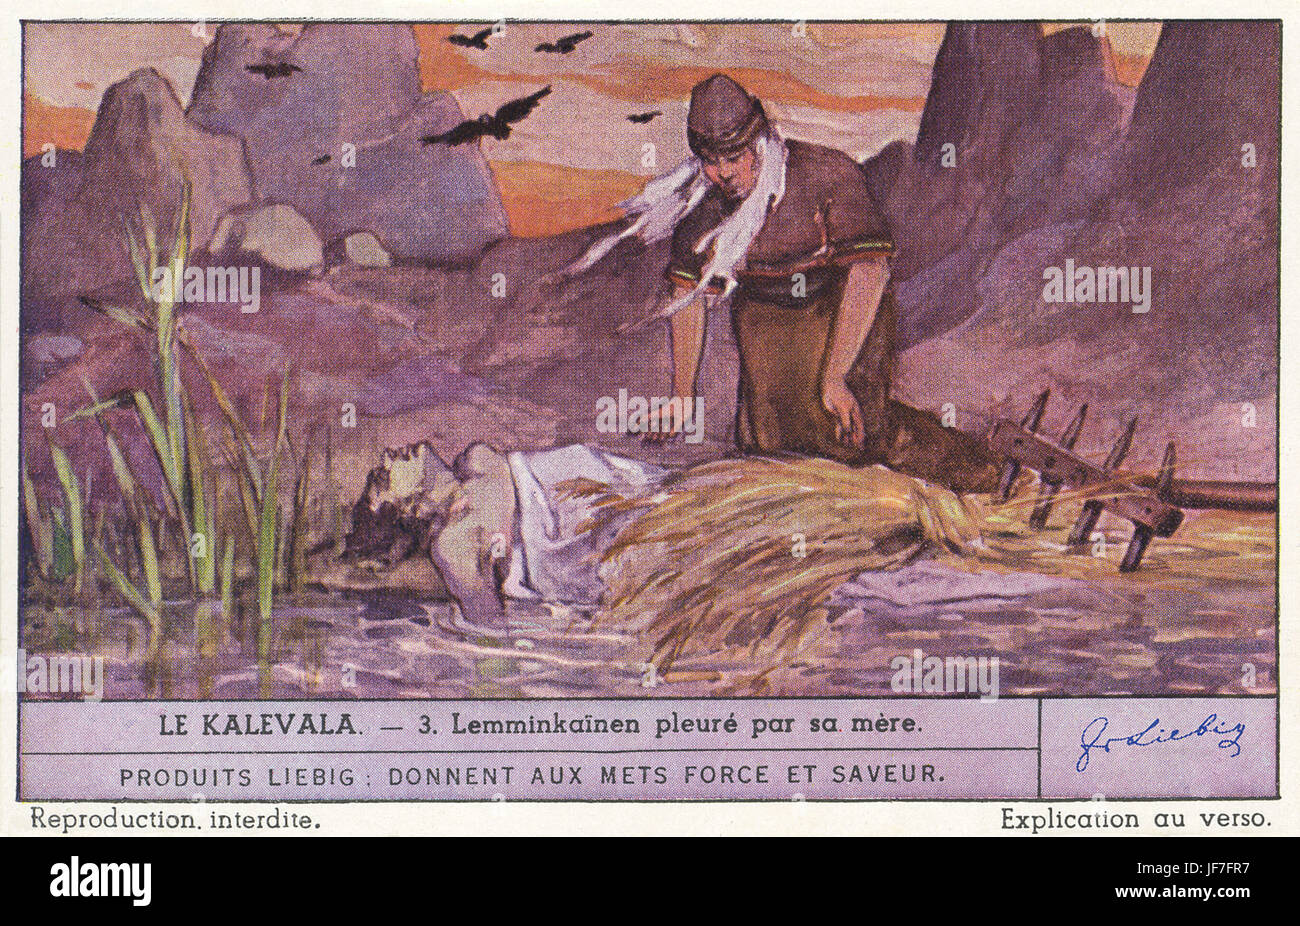 Kalevala, Finnish national epic, traditional songs collected by Elias Lonnrot. Lemminkainen is mourned by his mother, having gathered the pieces of his body from the river of Tuonela with a copper rake. Liebig collectors' card 1947 Stock Photo